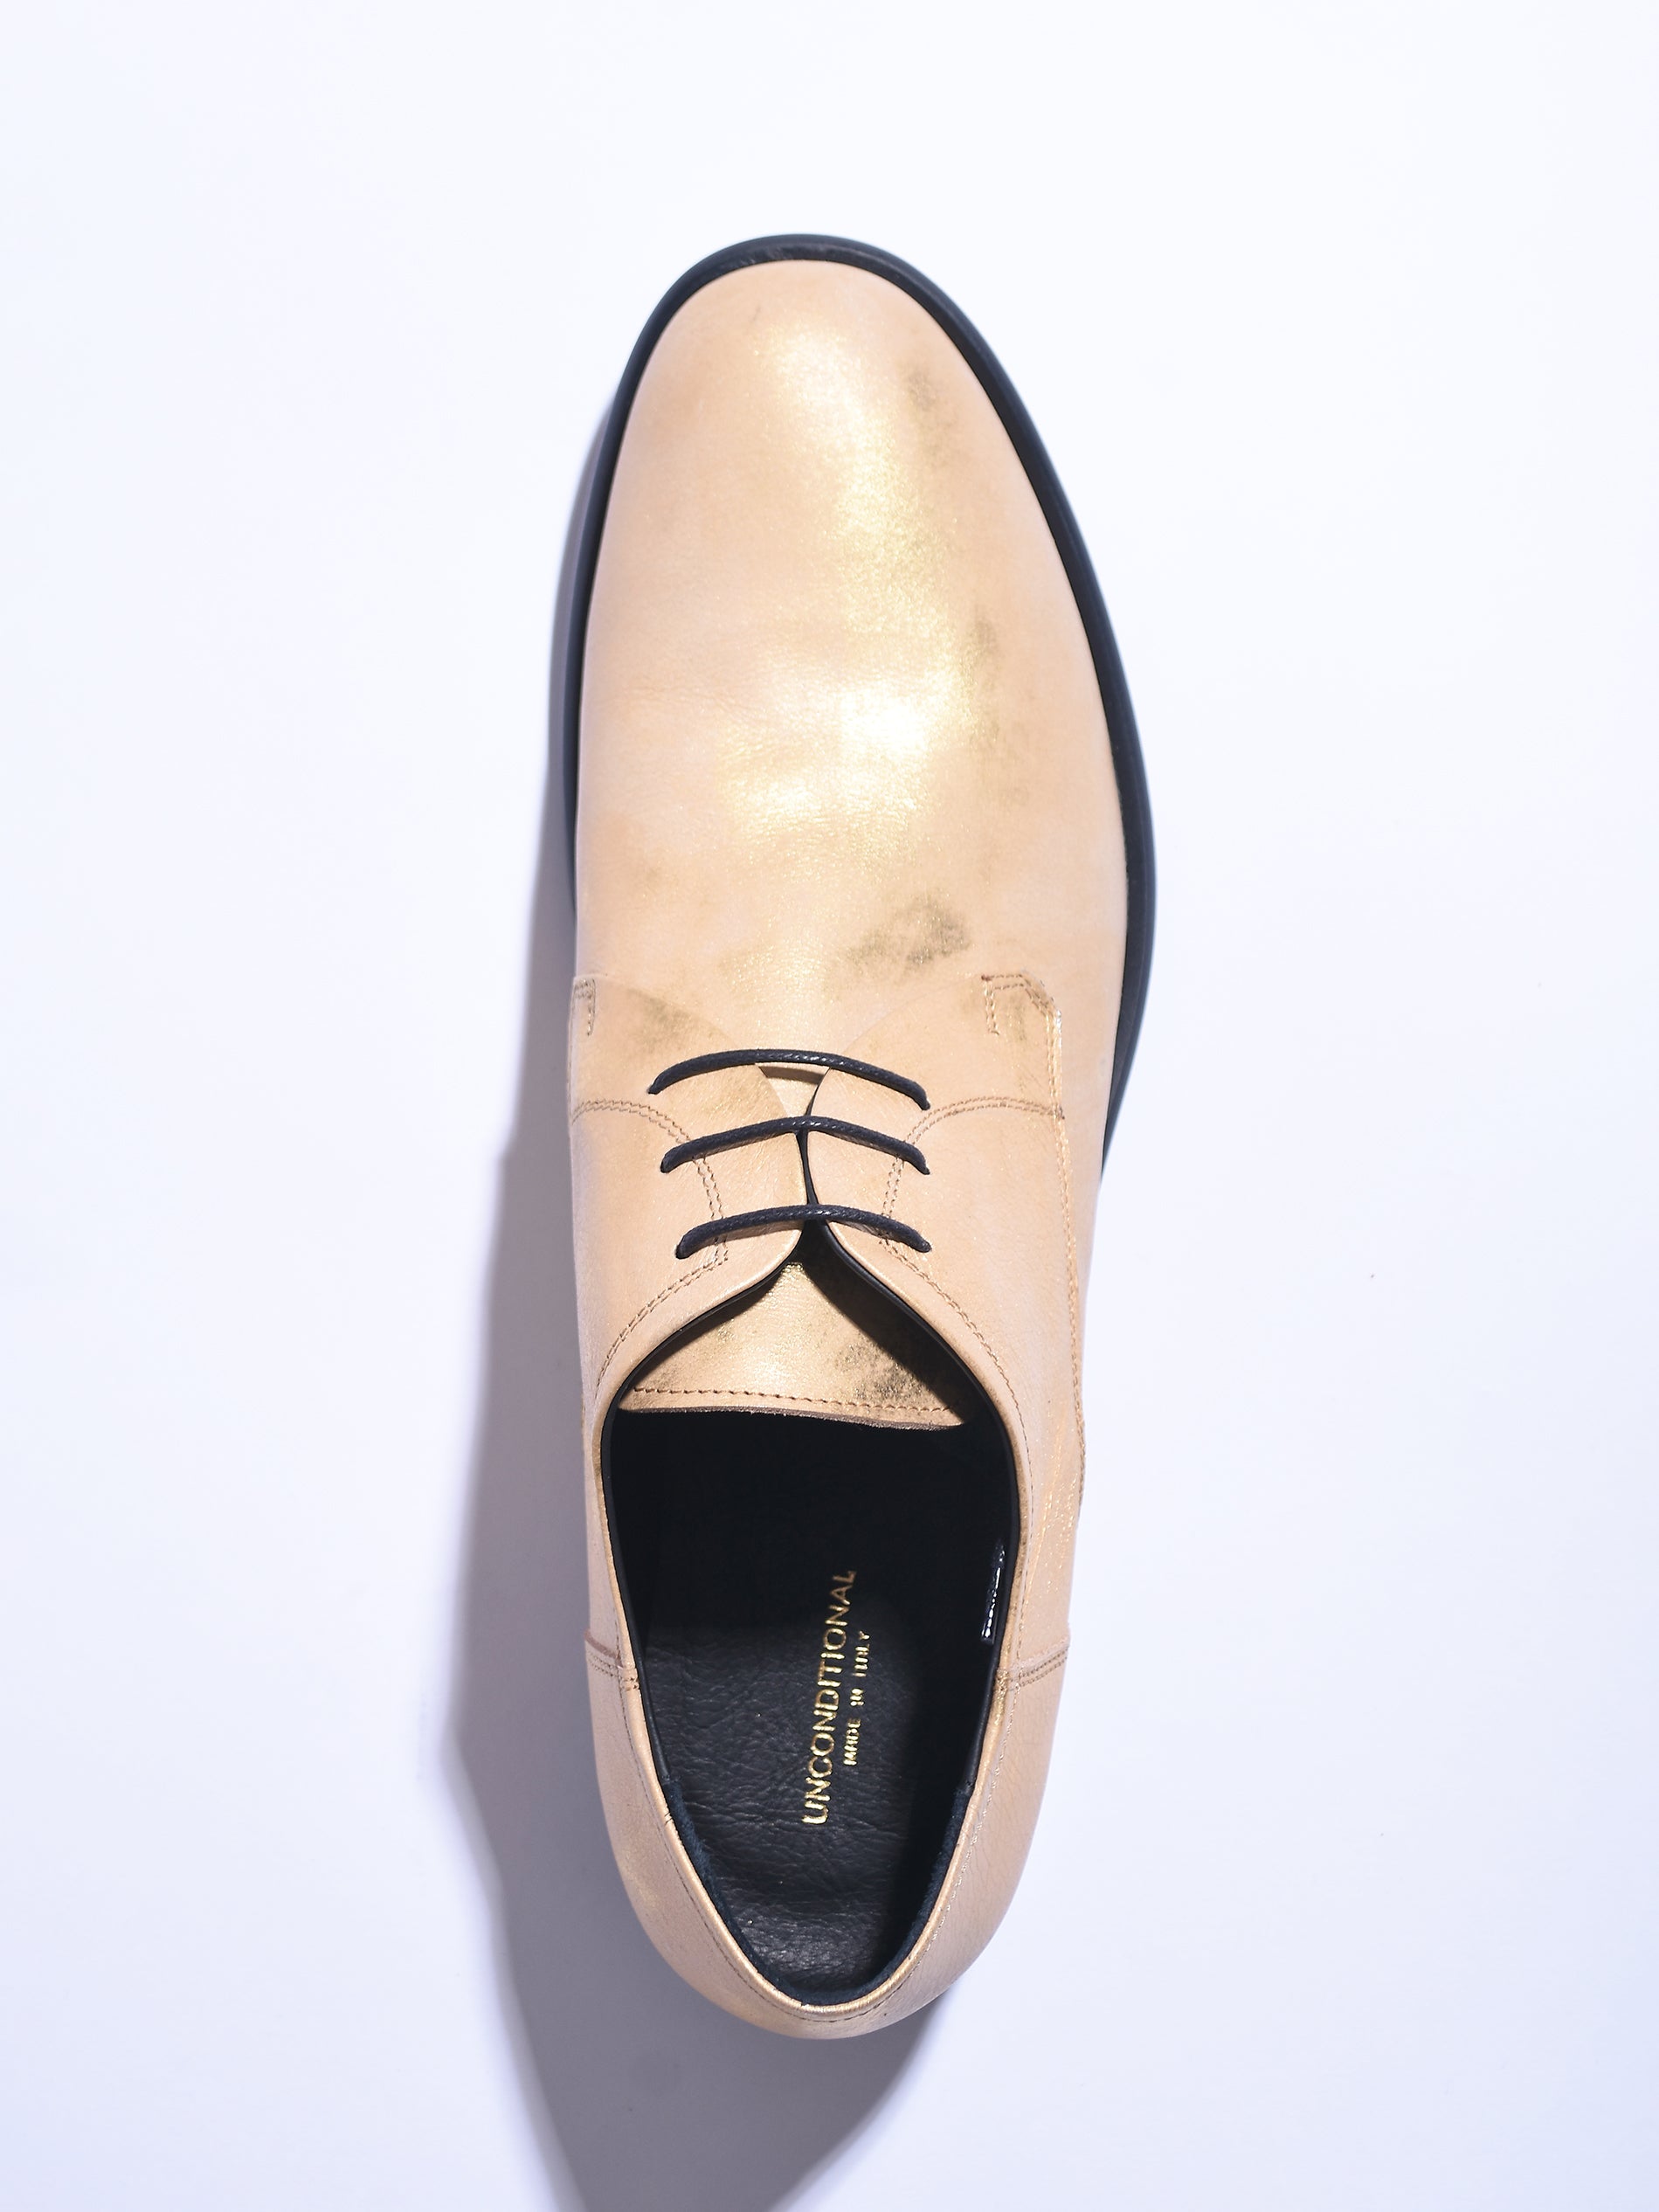 UNCONDITIONAL GOLD DERBY SHOES